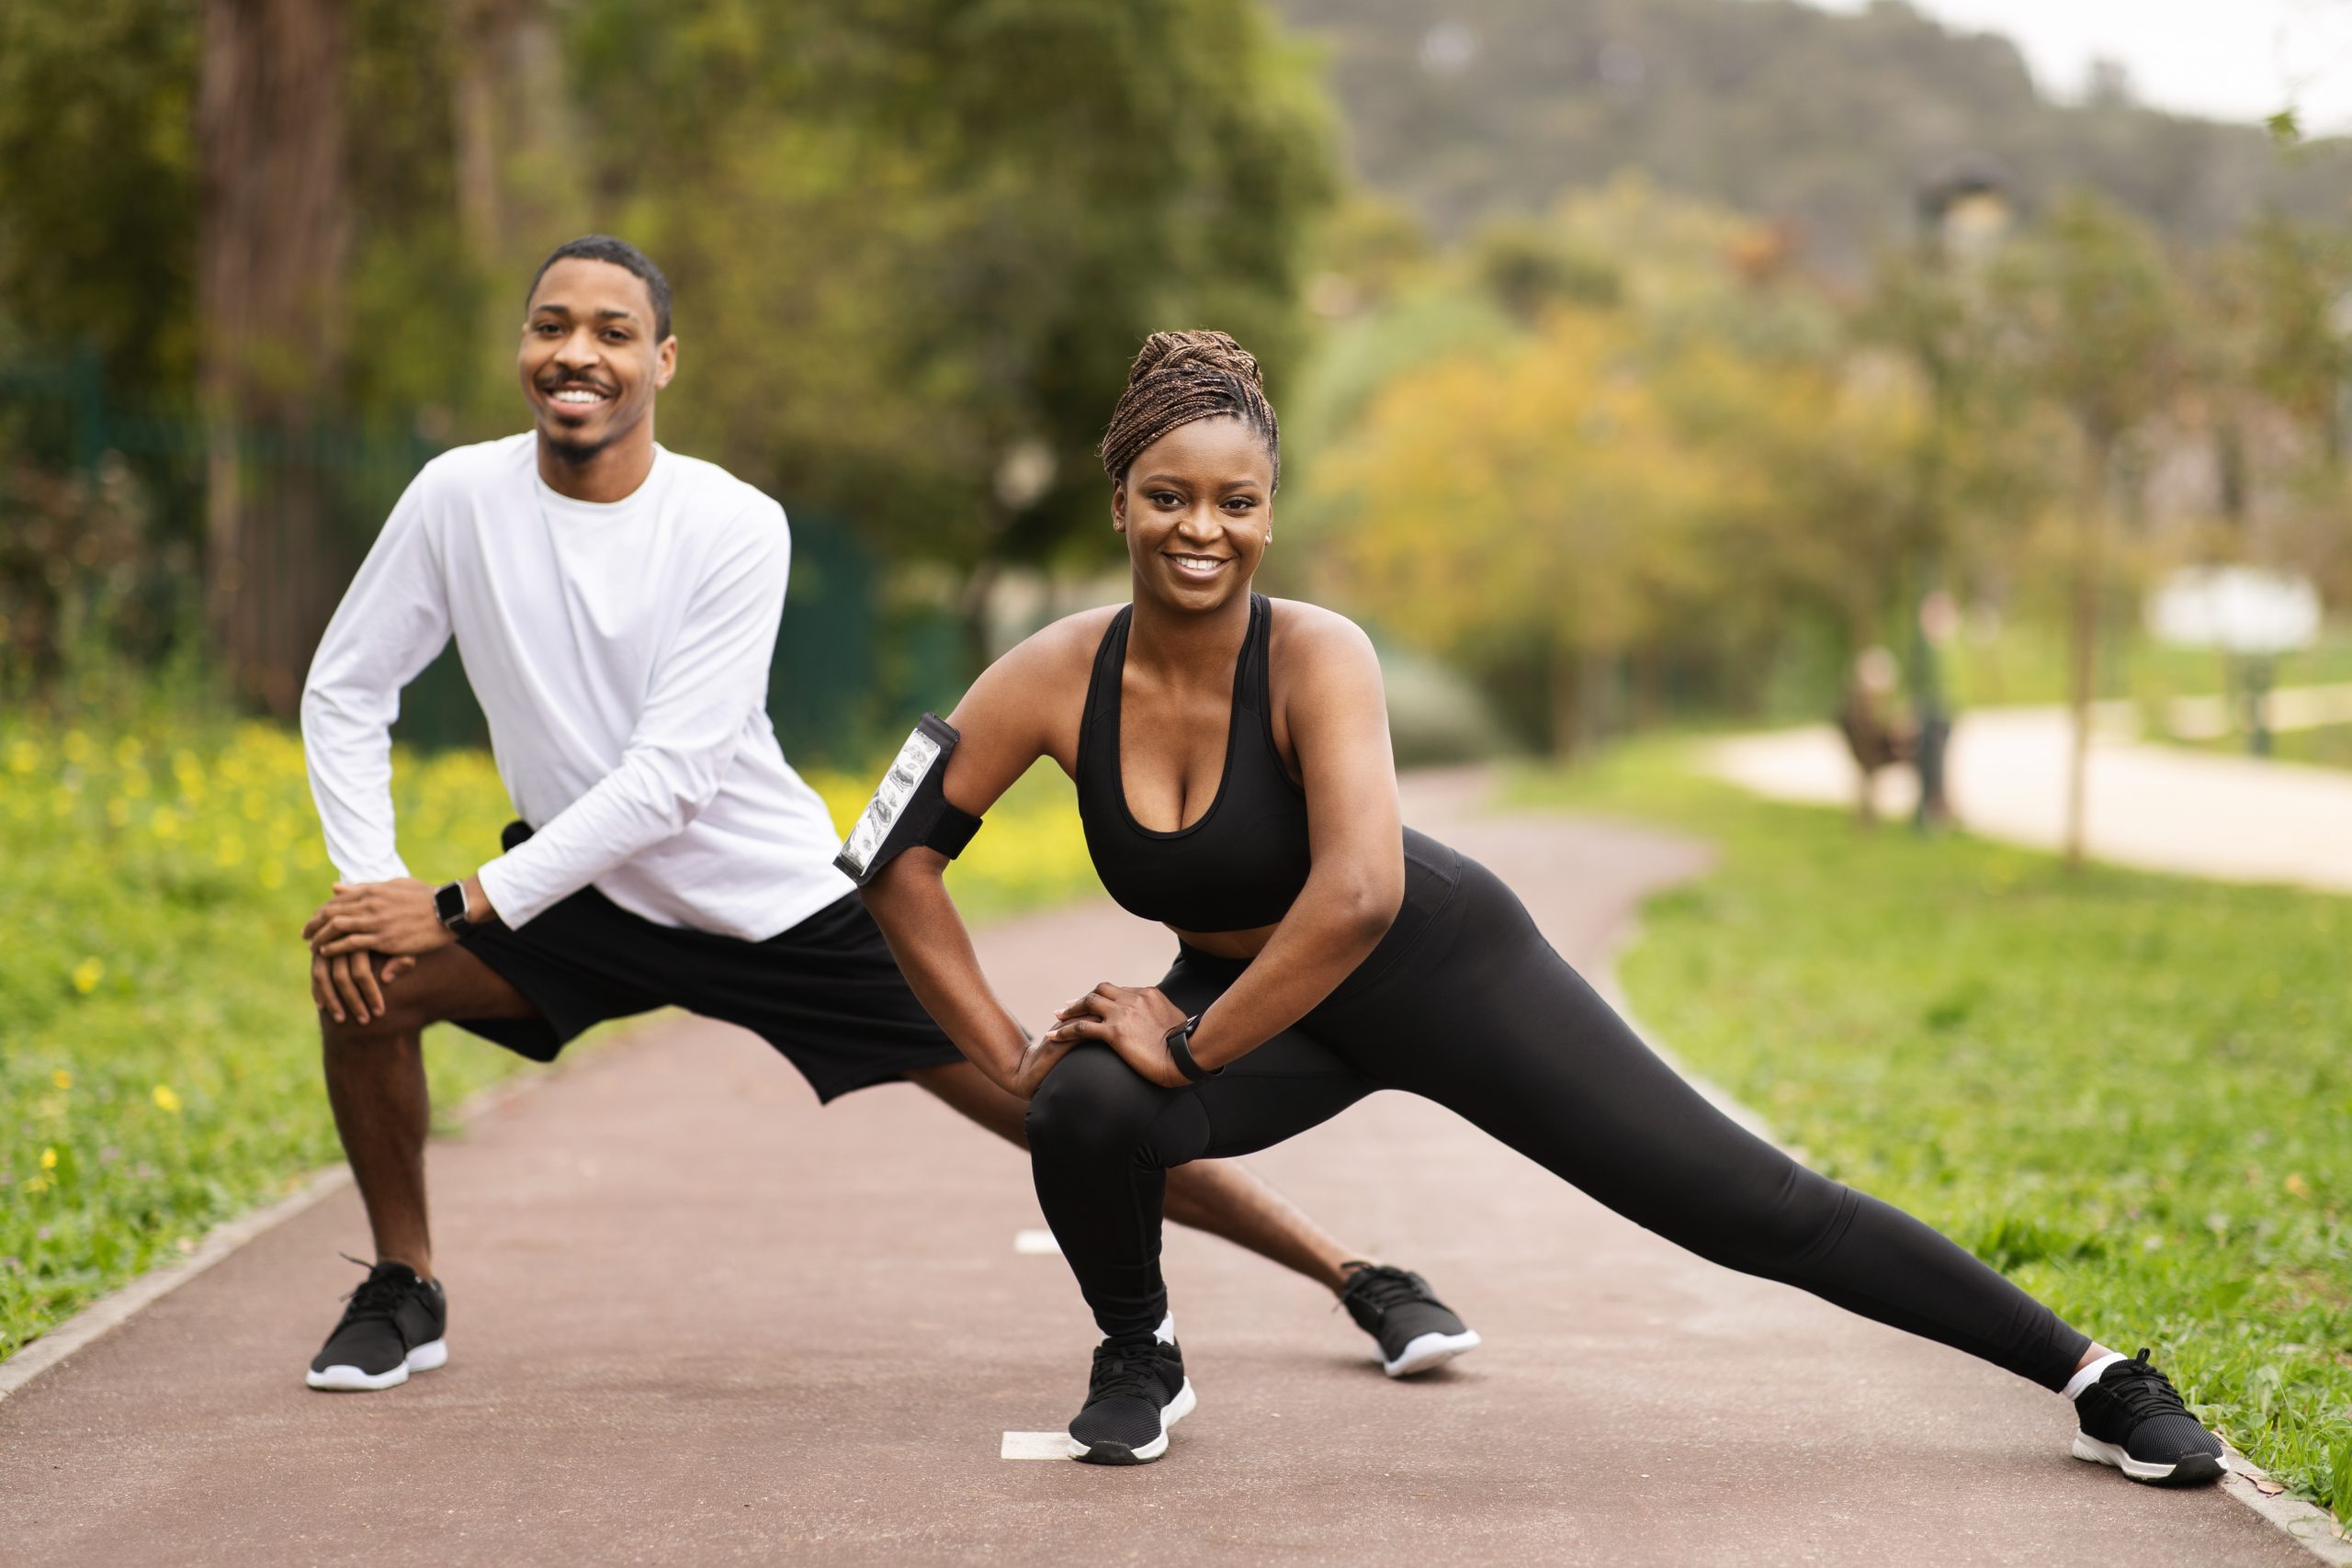 Young Black man and woman stretch their legs on a paved trail